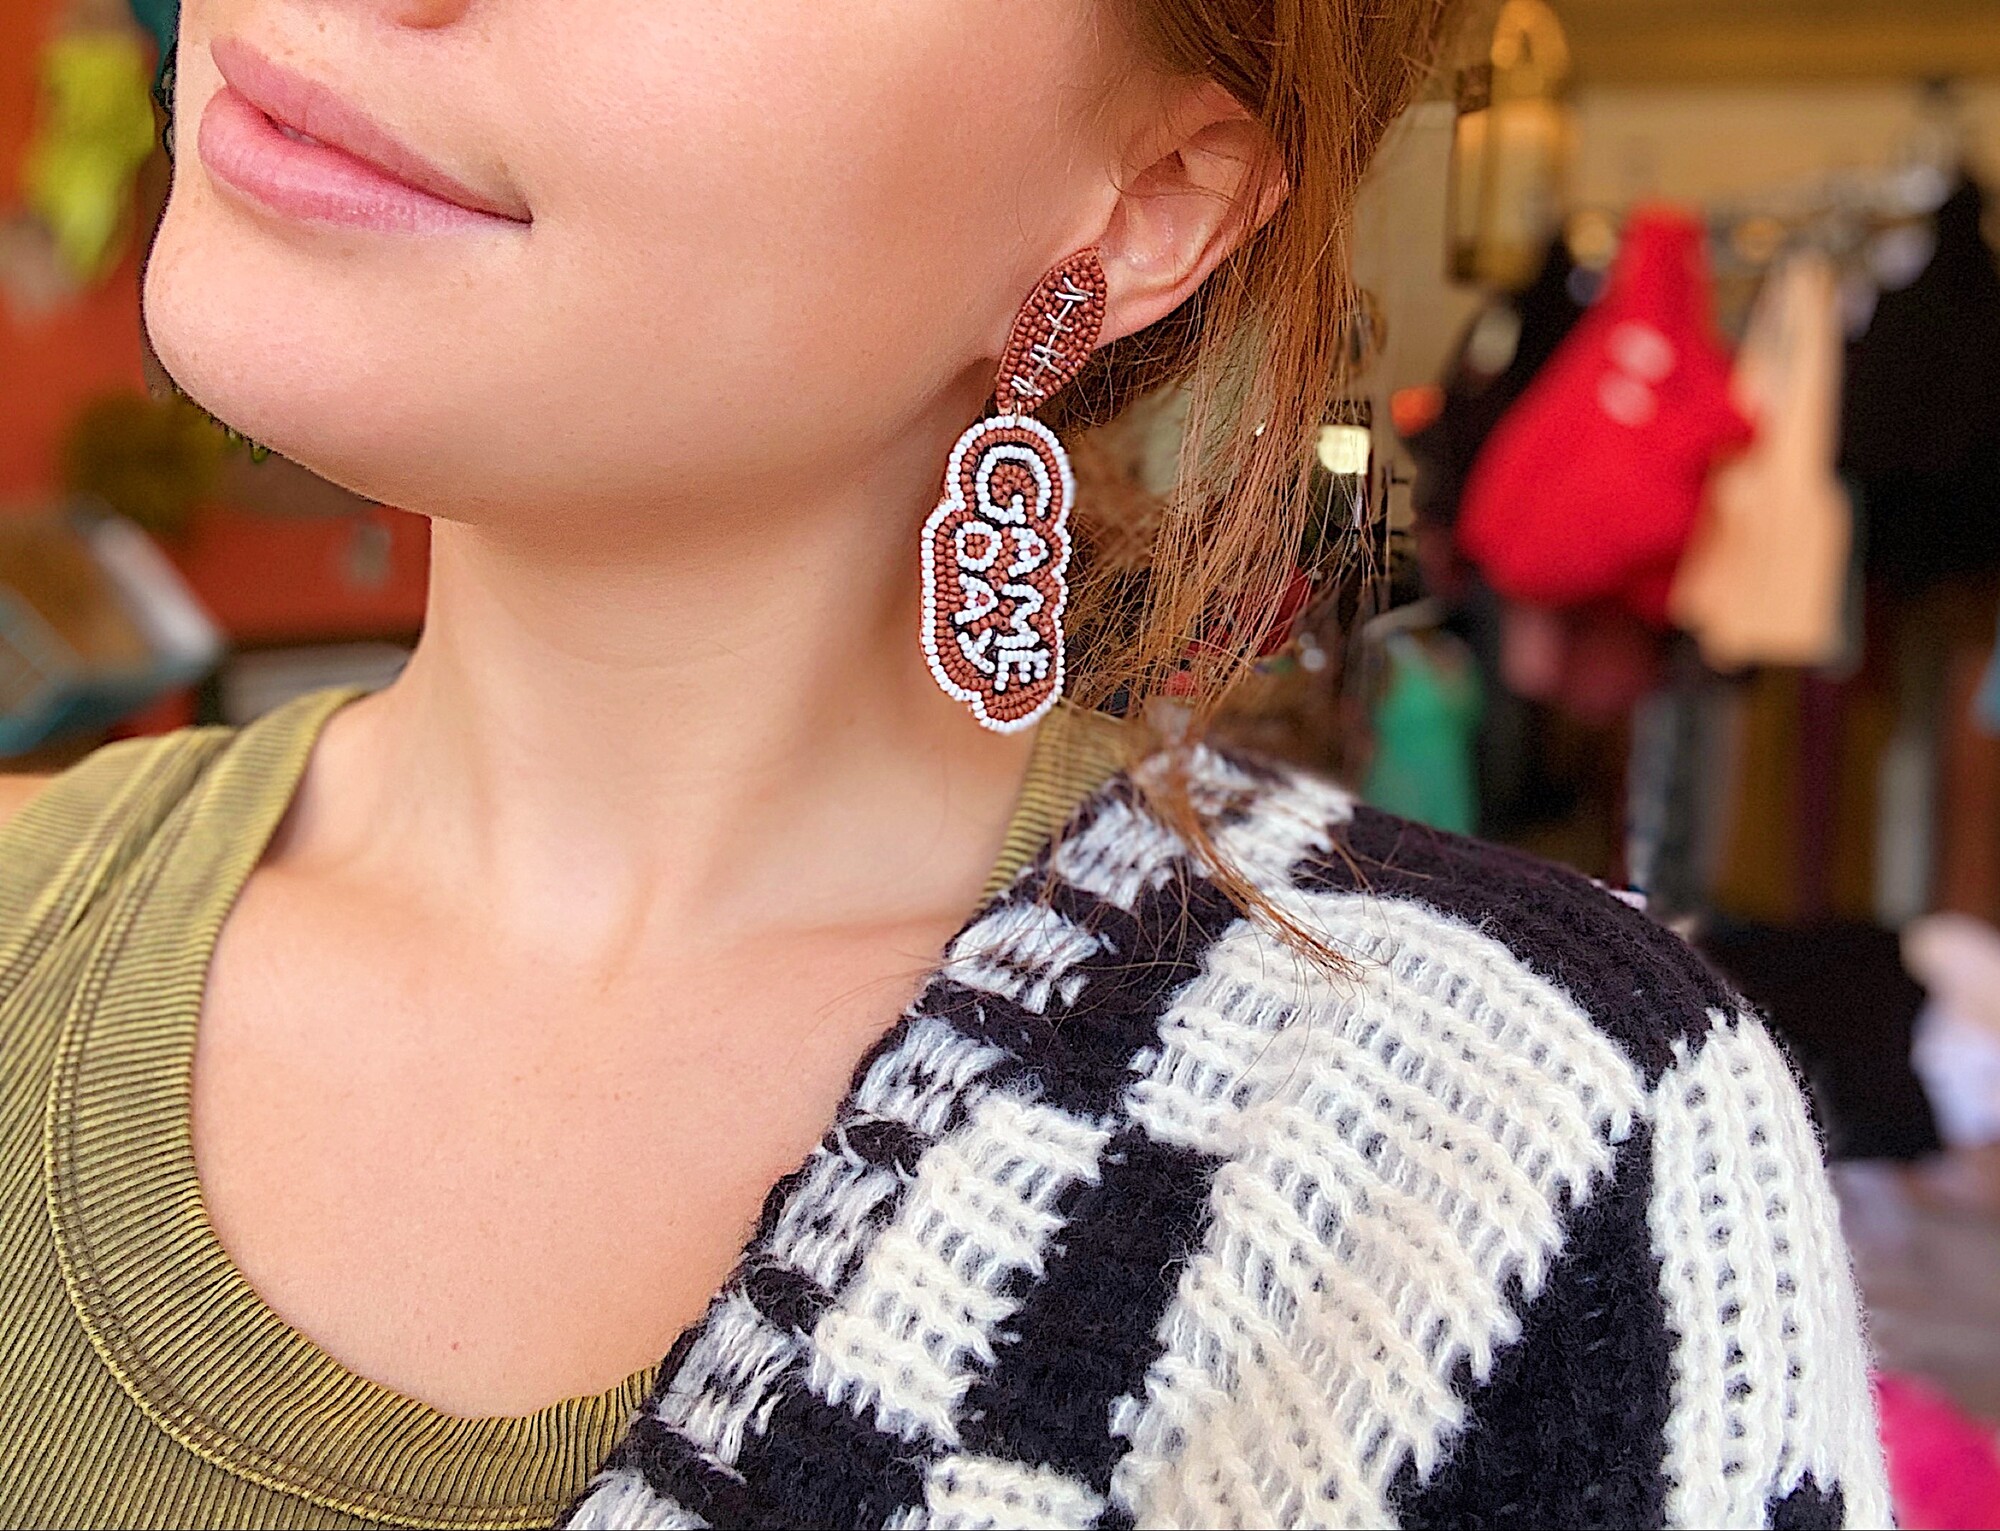 These sead bead earrings are perfect for game day!